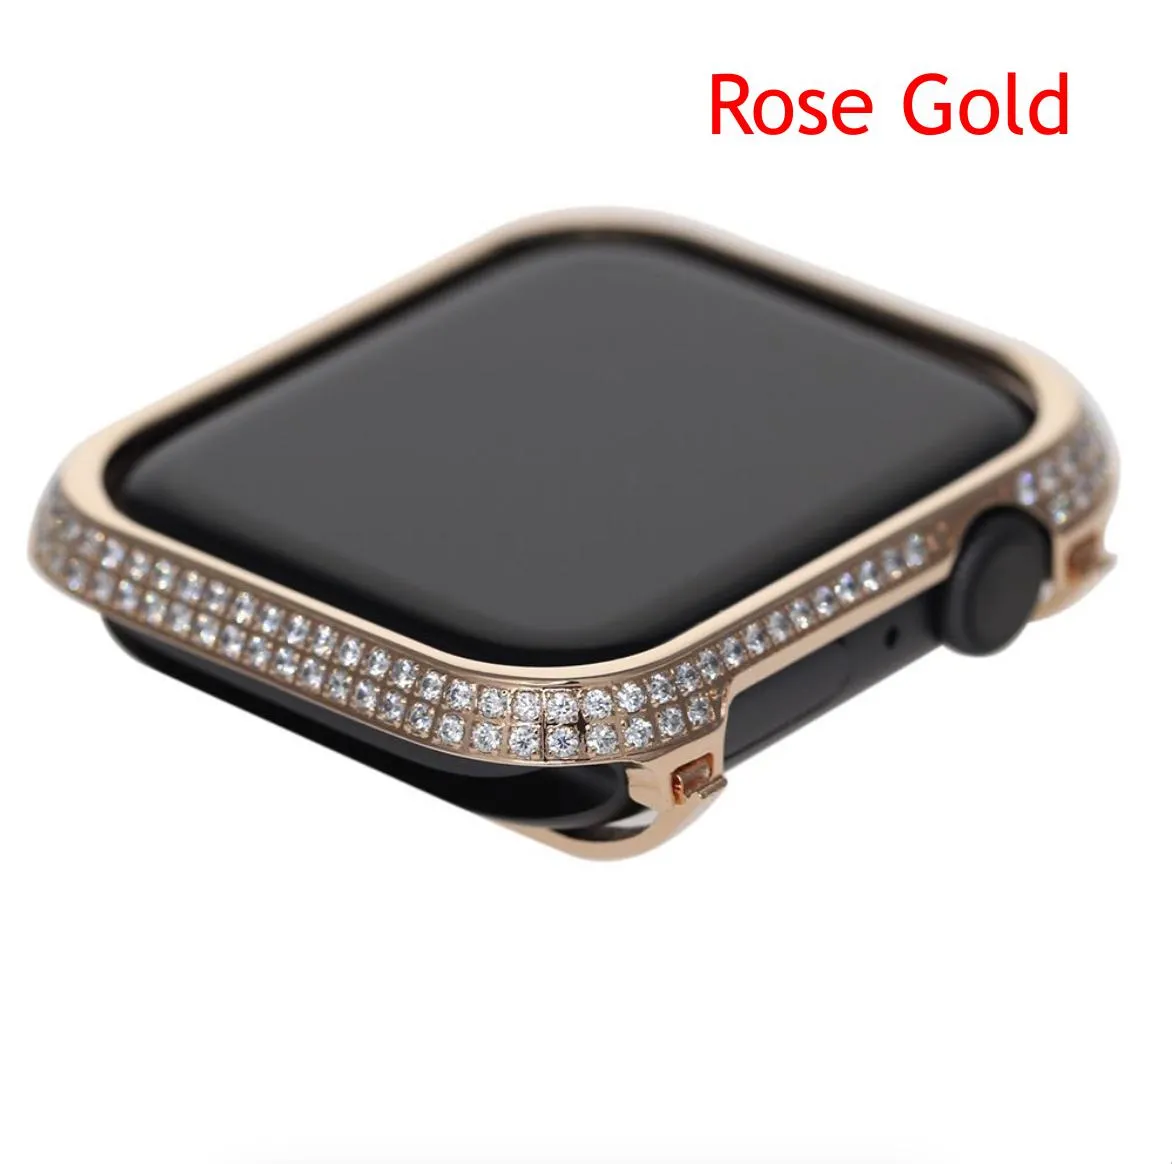 Para Apple Watch Series 4 Rhinestone Diamond Case Hecho a mano Zircon Bisel Bisel Electroplating Gold Watch Cover 40mm 44mm